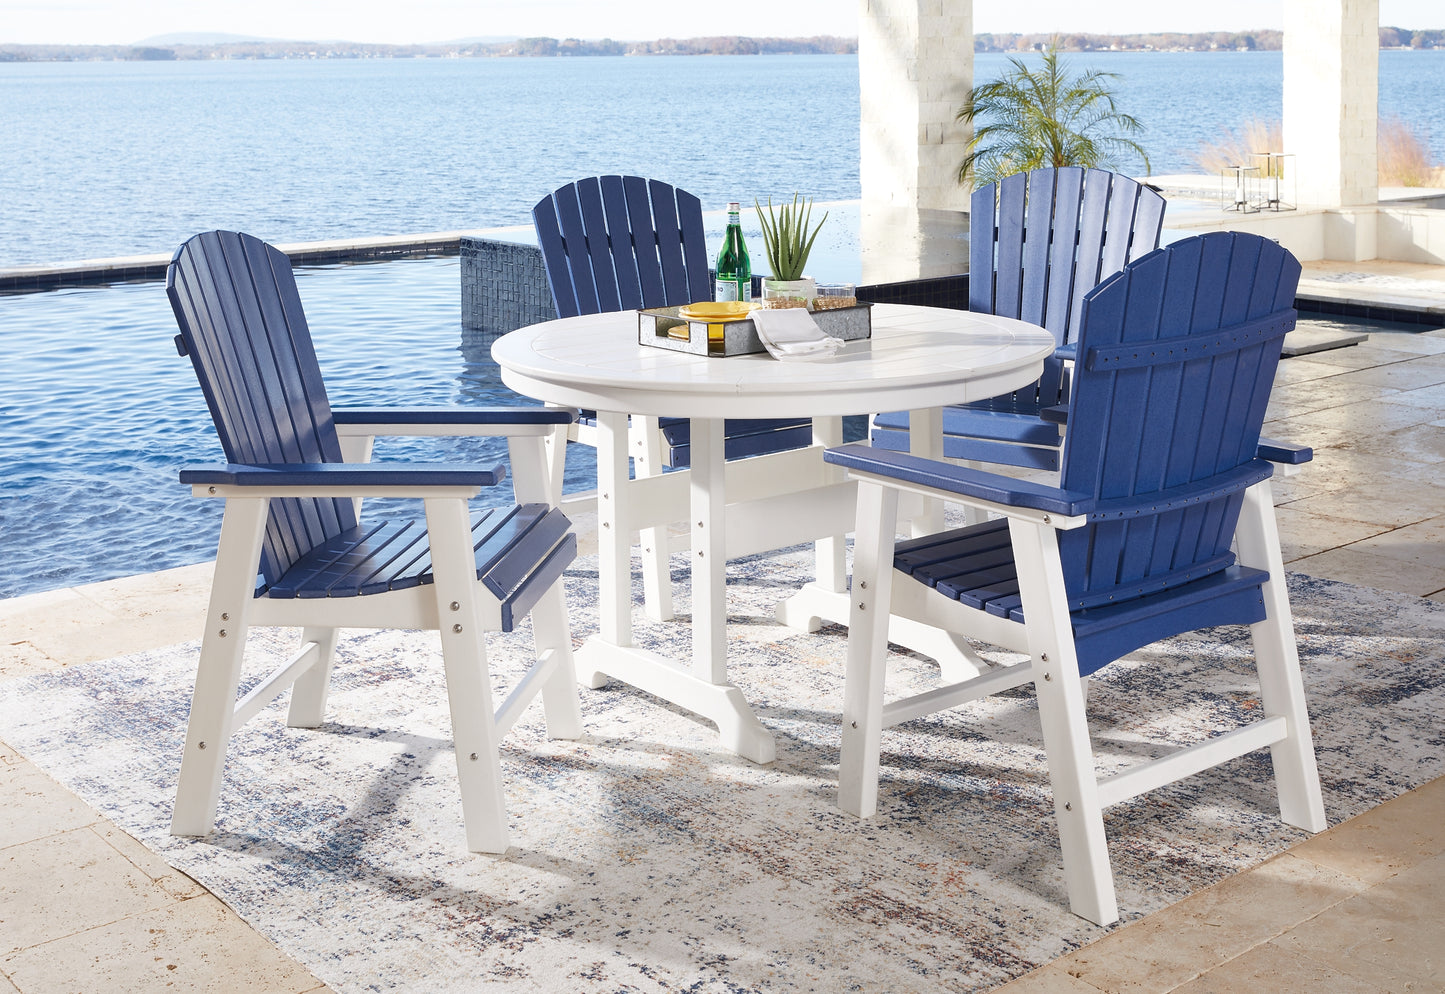 Toretto Outdoor Dining Table and 4 Chairs